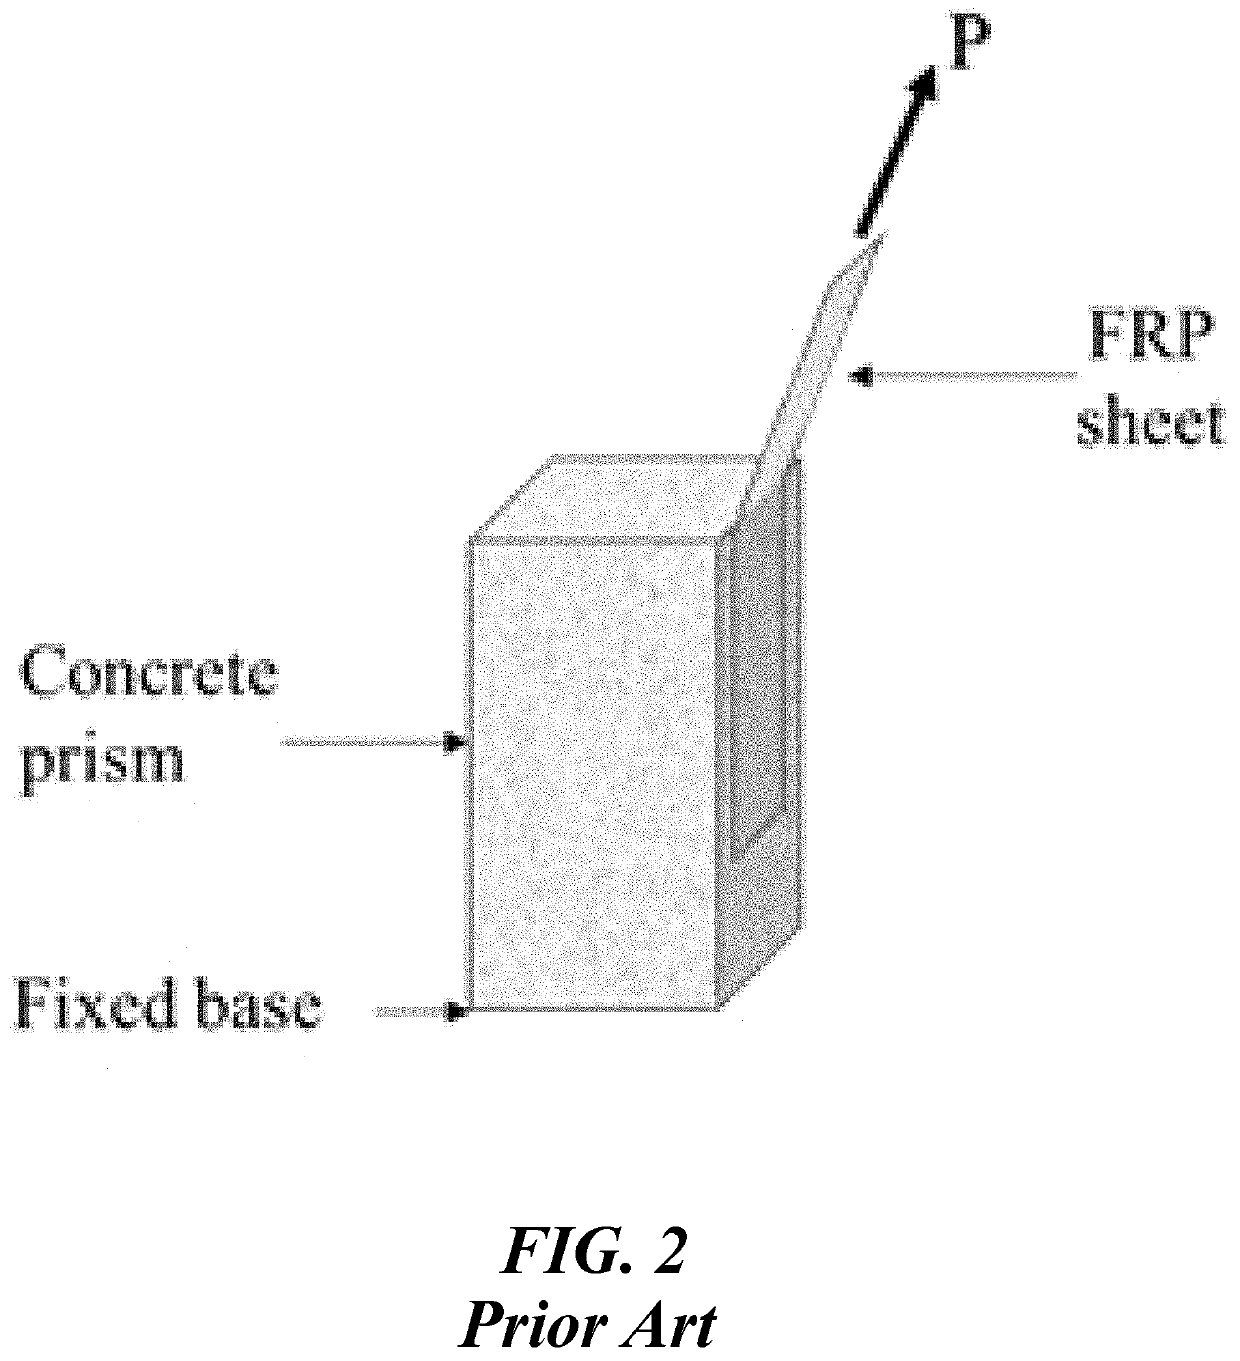 Universal debonding test apparatus for carbon fiber reinforced polymer-concrete system and method for sequential multi-testing